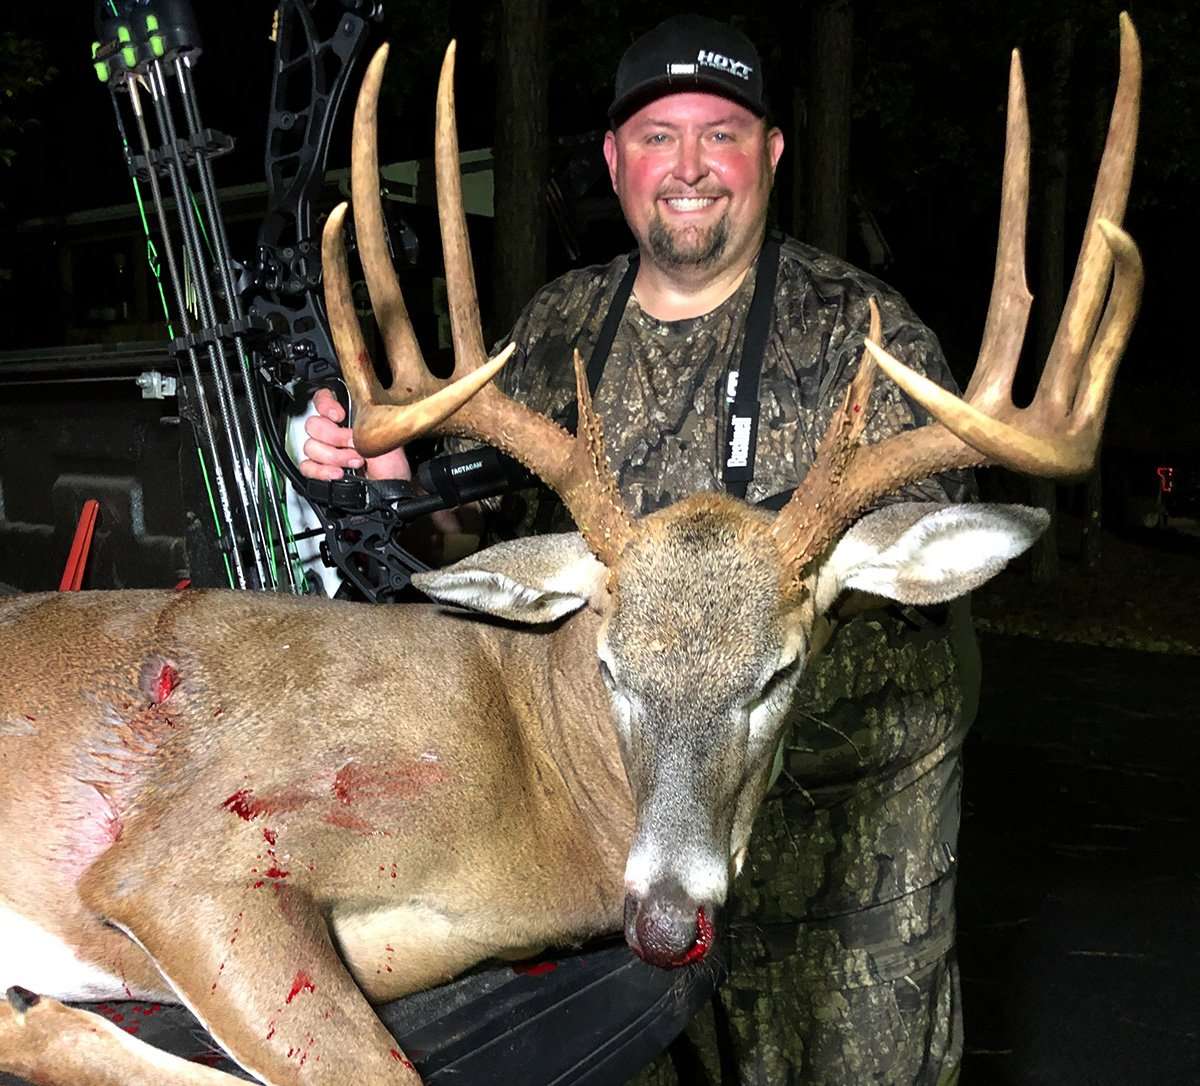 Pimple Hill doesn't have the prettiest ring, but T-Bone's buck sure is a beauty. 